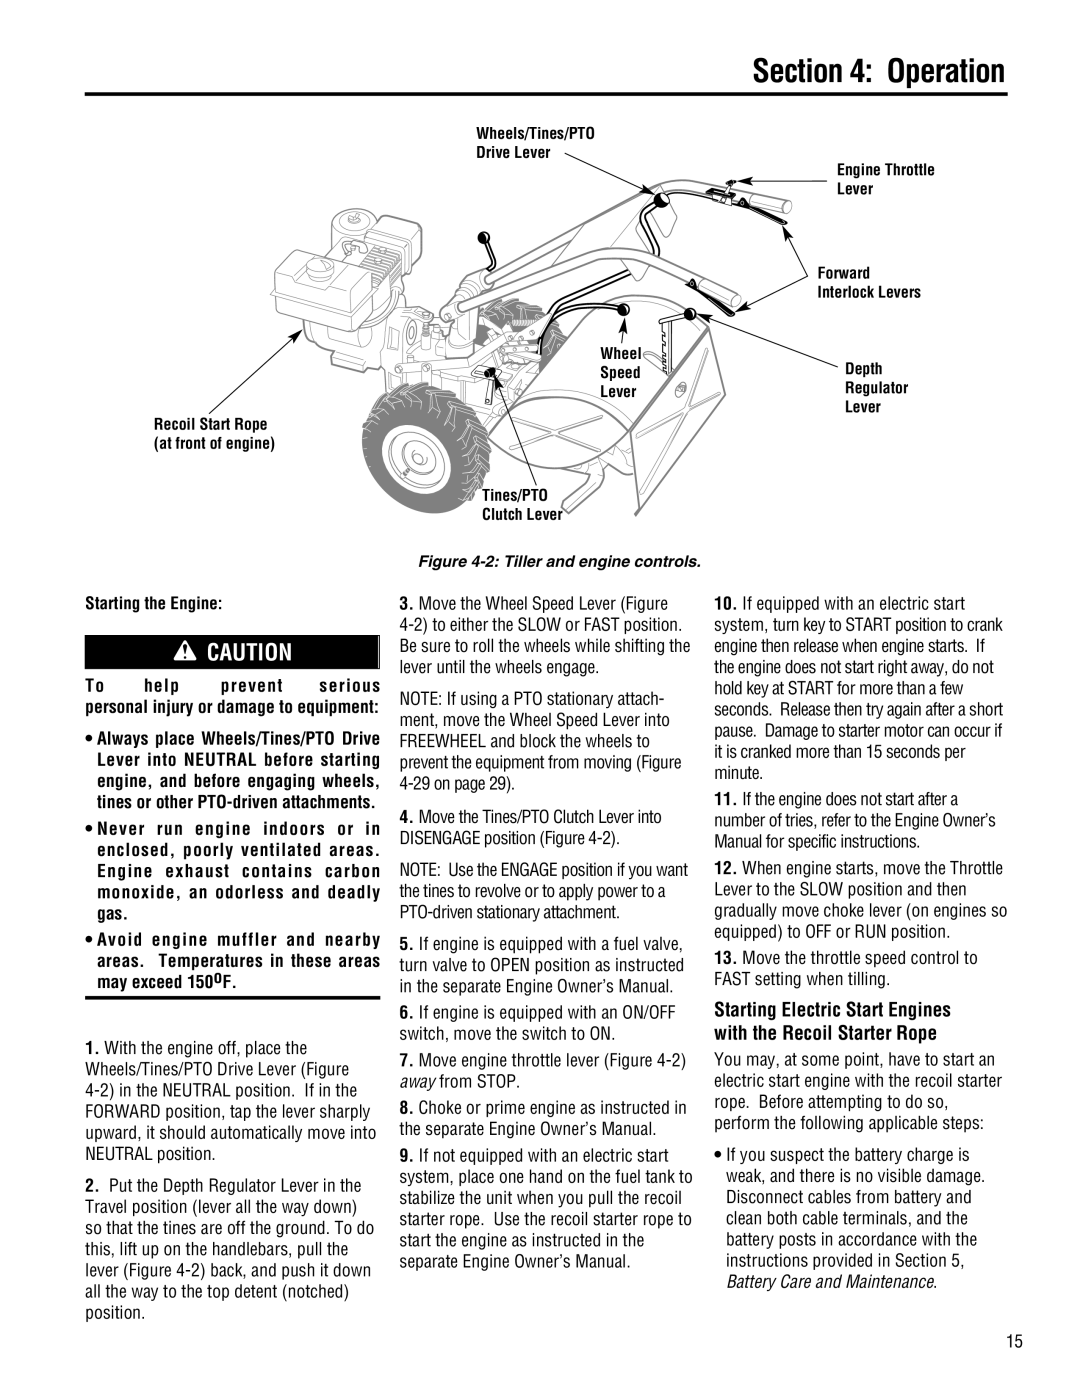 Troy-Bilt E682J-Horse manual Operation, Starting the Engine, To help prevent serious personal injury or damage to equipment 